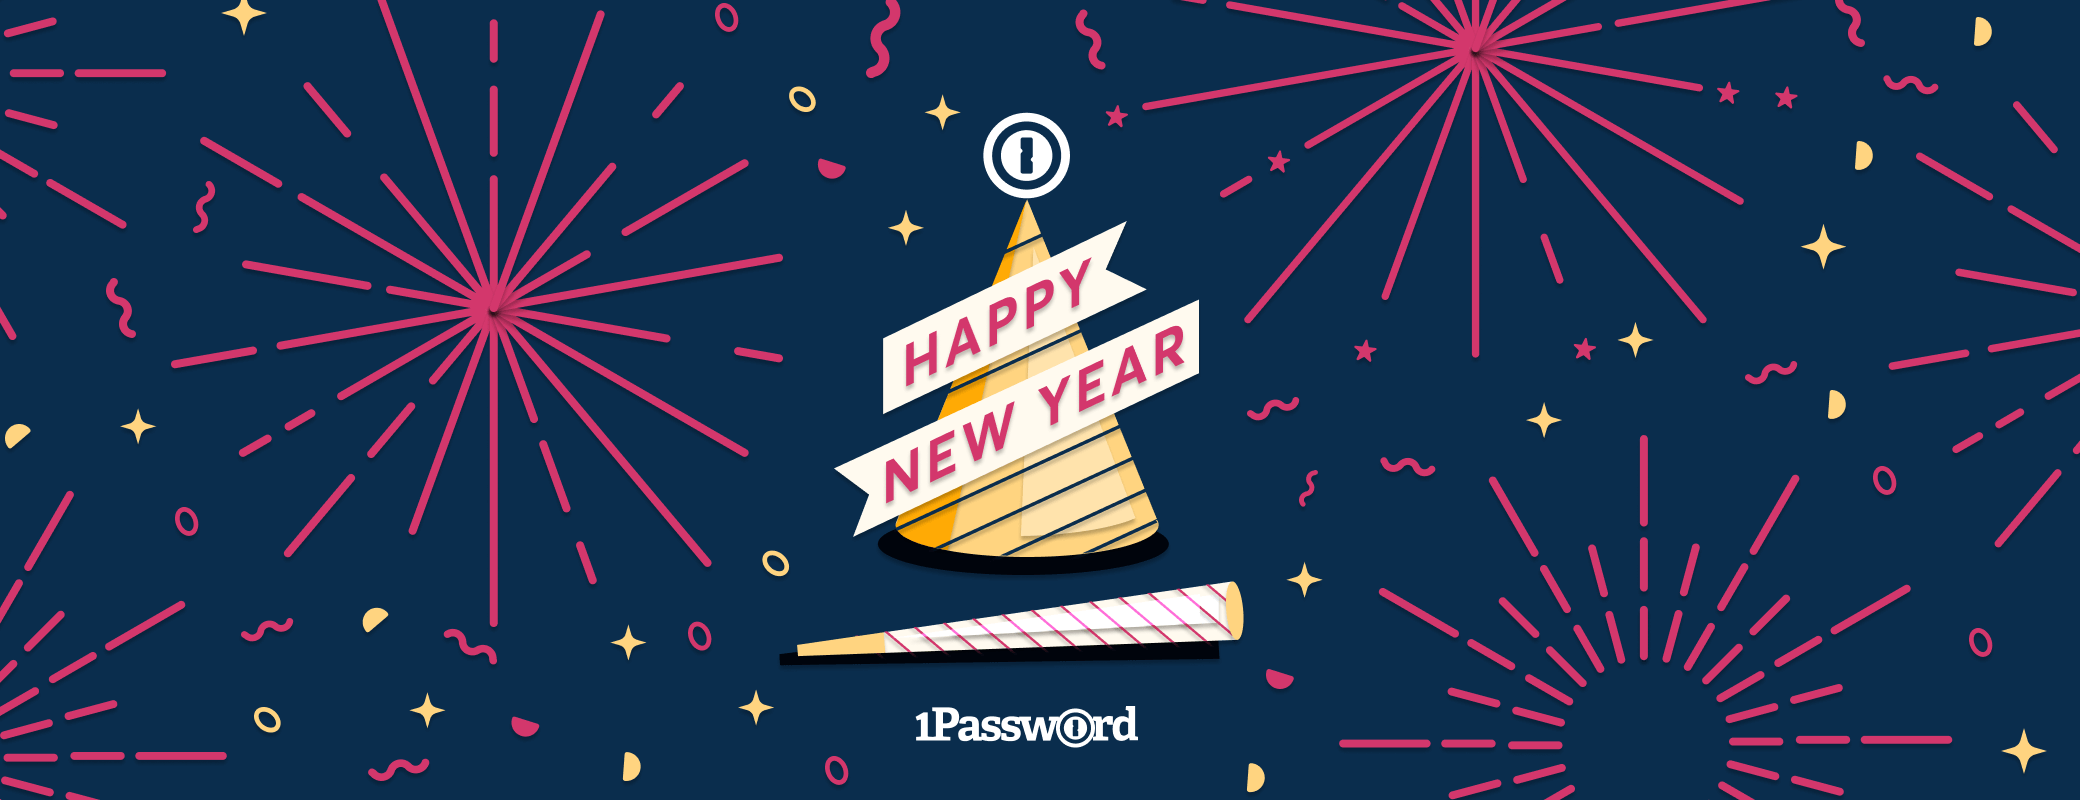 Happy 1Password updates for the New Year! ~ from Dave's newsletter